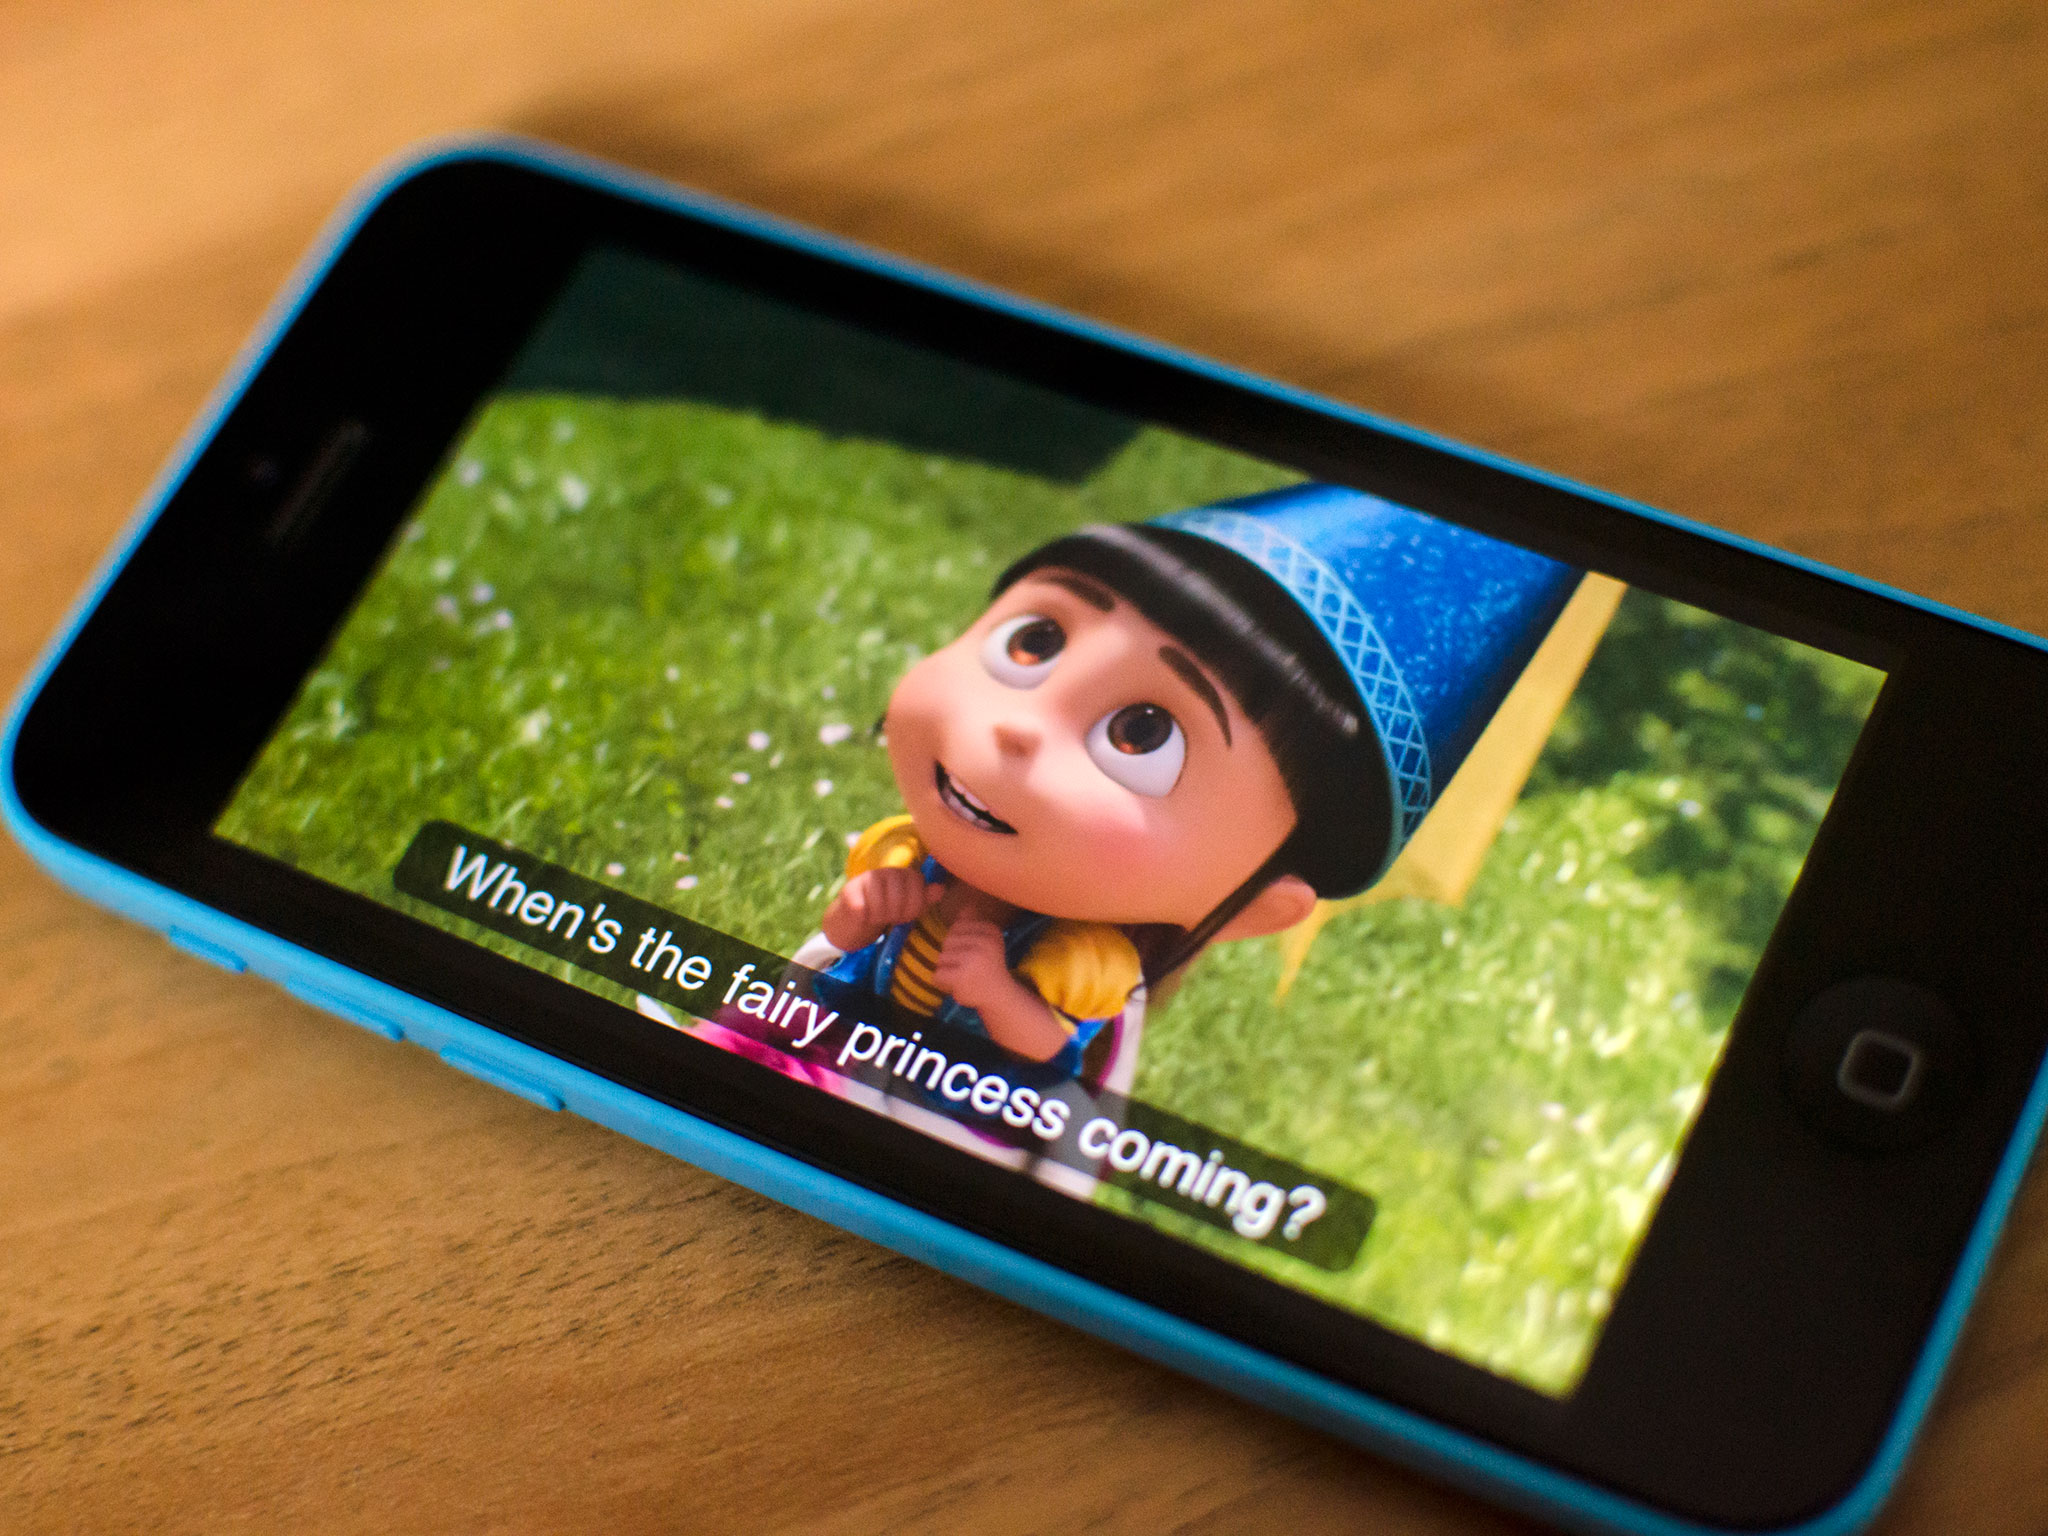 How to enable subtitles and captioning for auditory accessibility on iPhone or iPad